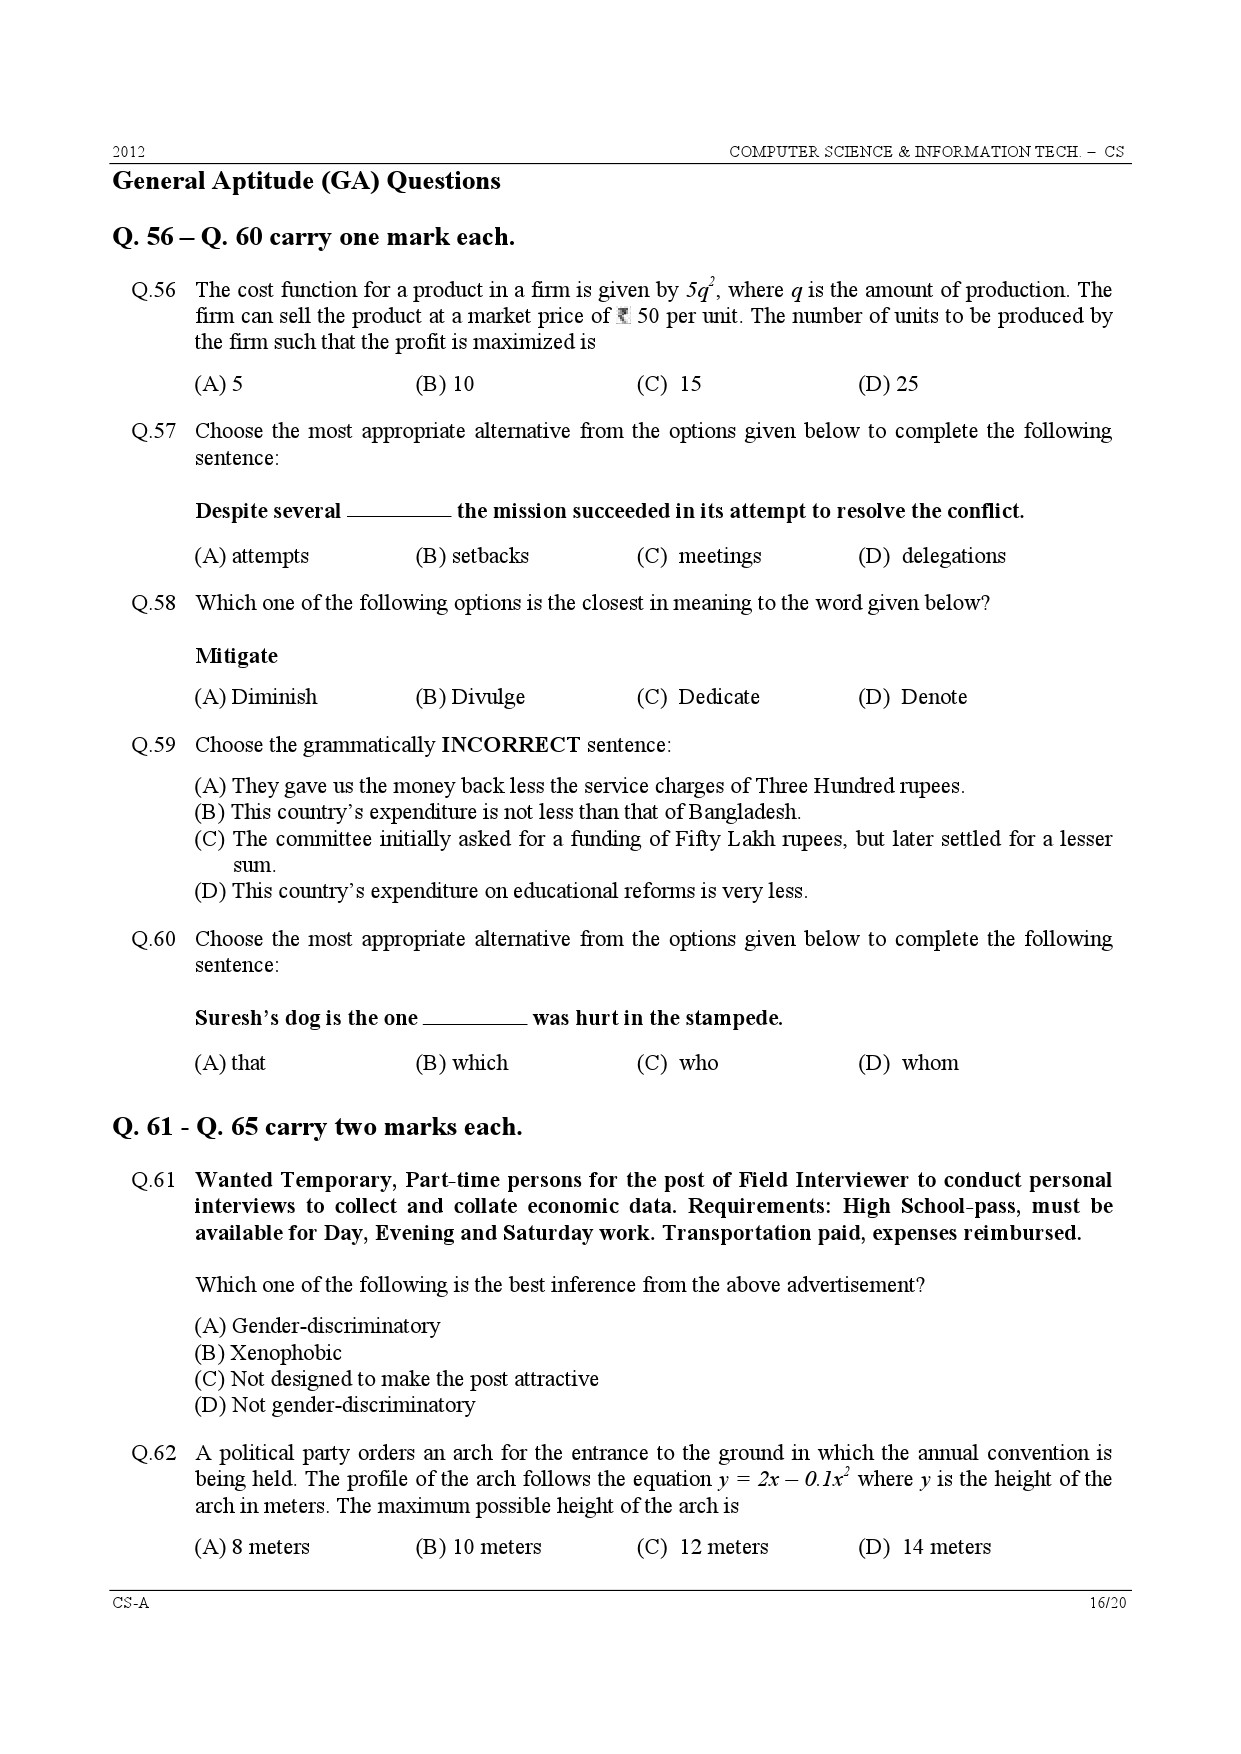 GATE Exam Question Paper 2012 Computer Science and Information Technology 16